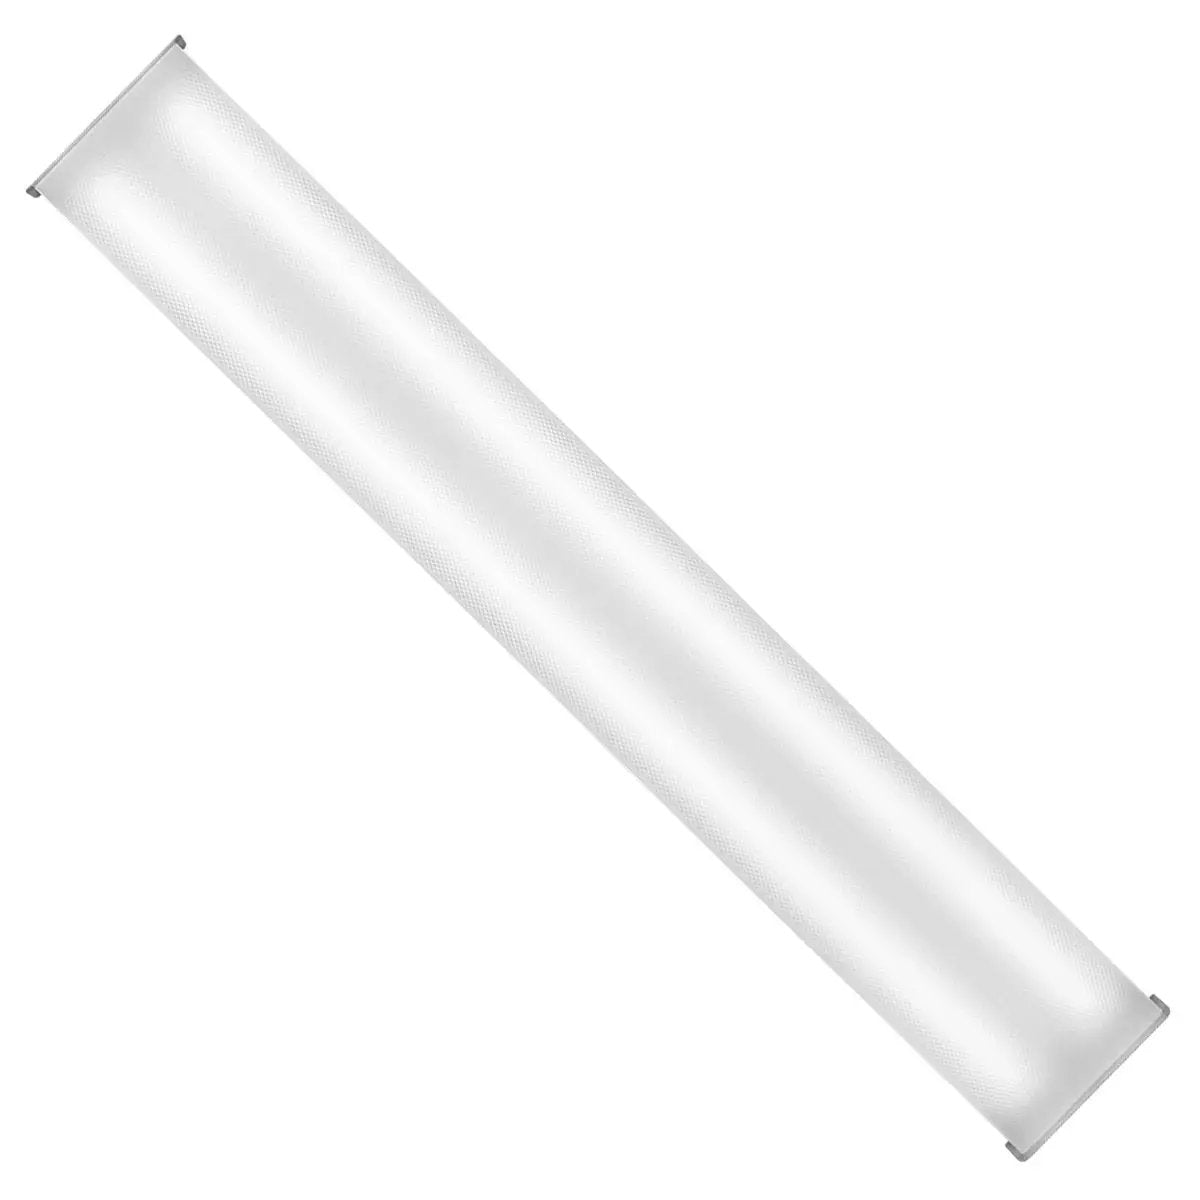 A white rectangular wrap lighting fixture with a silver rim, suitable for general indoor use. Provides 2992 lumens of light output.